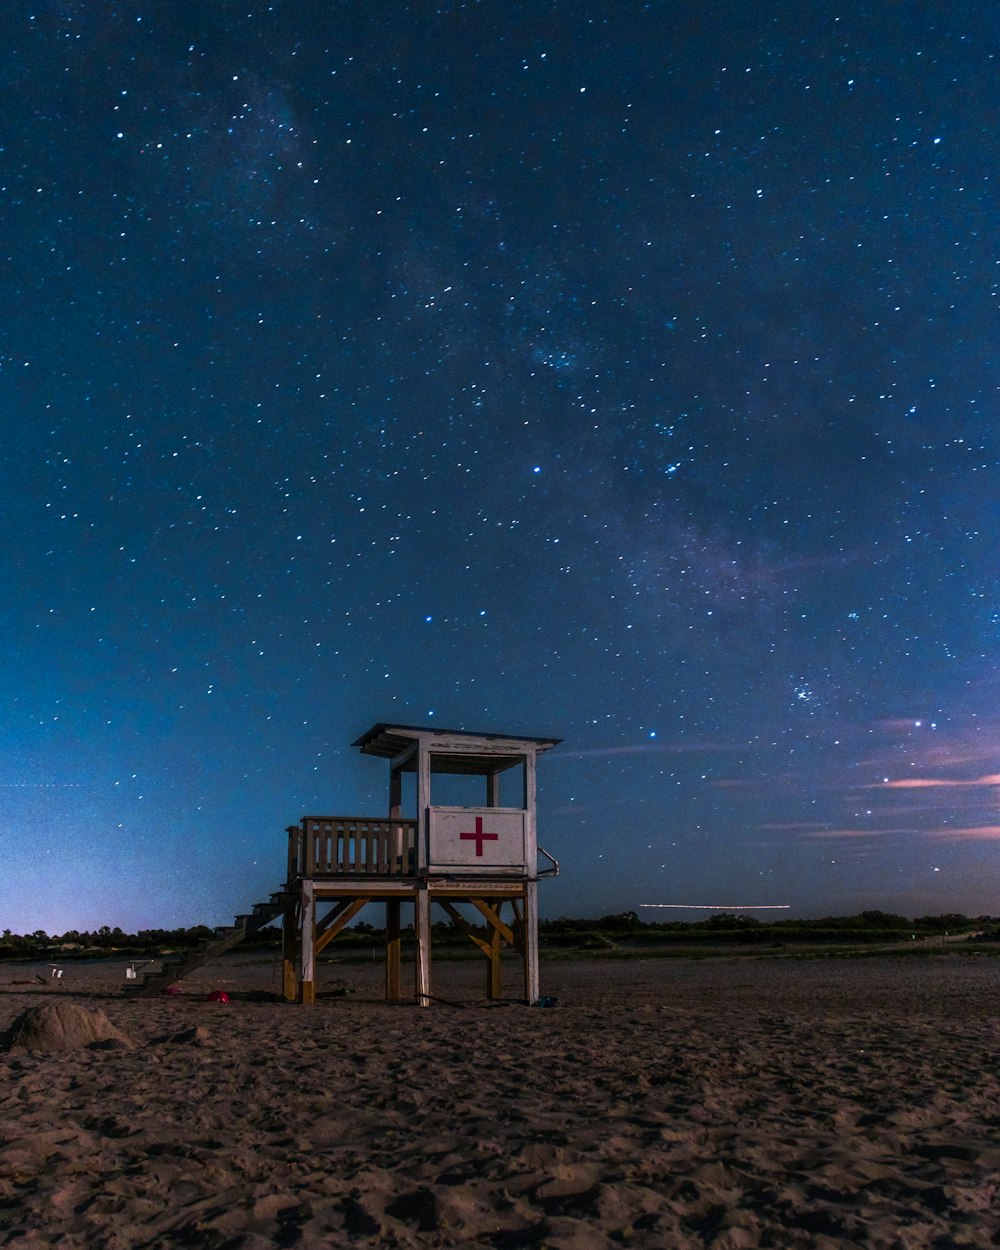 white lifeguard shed on beach under starry sky